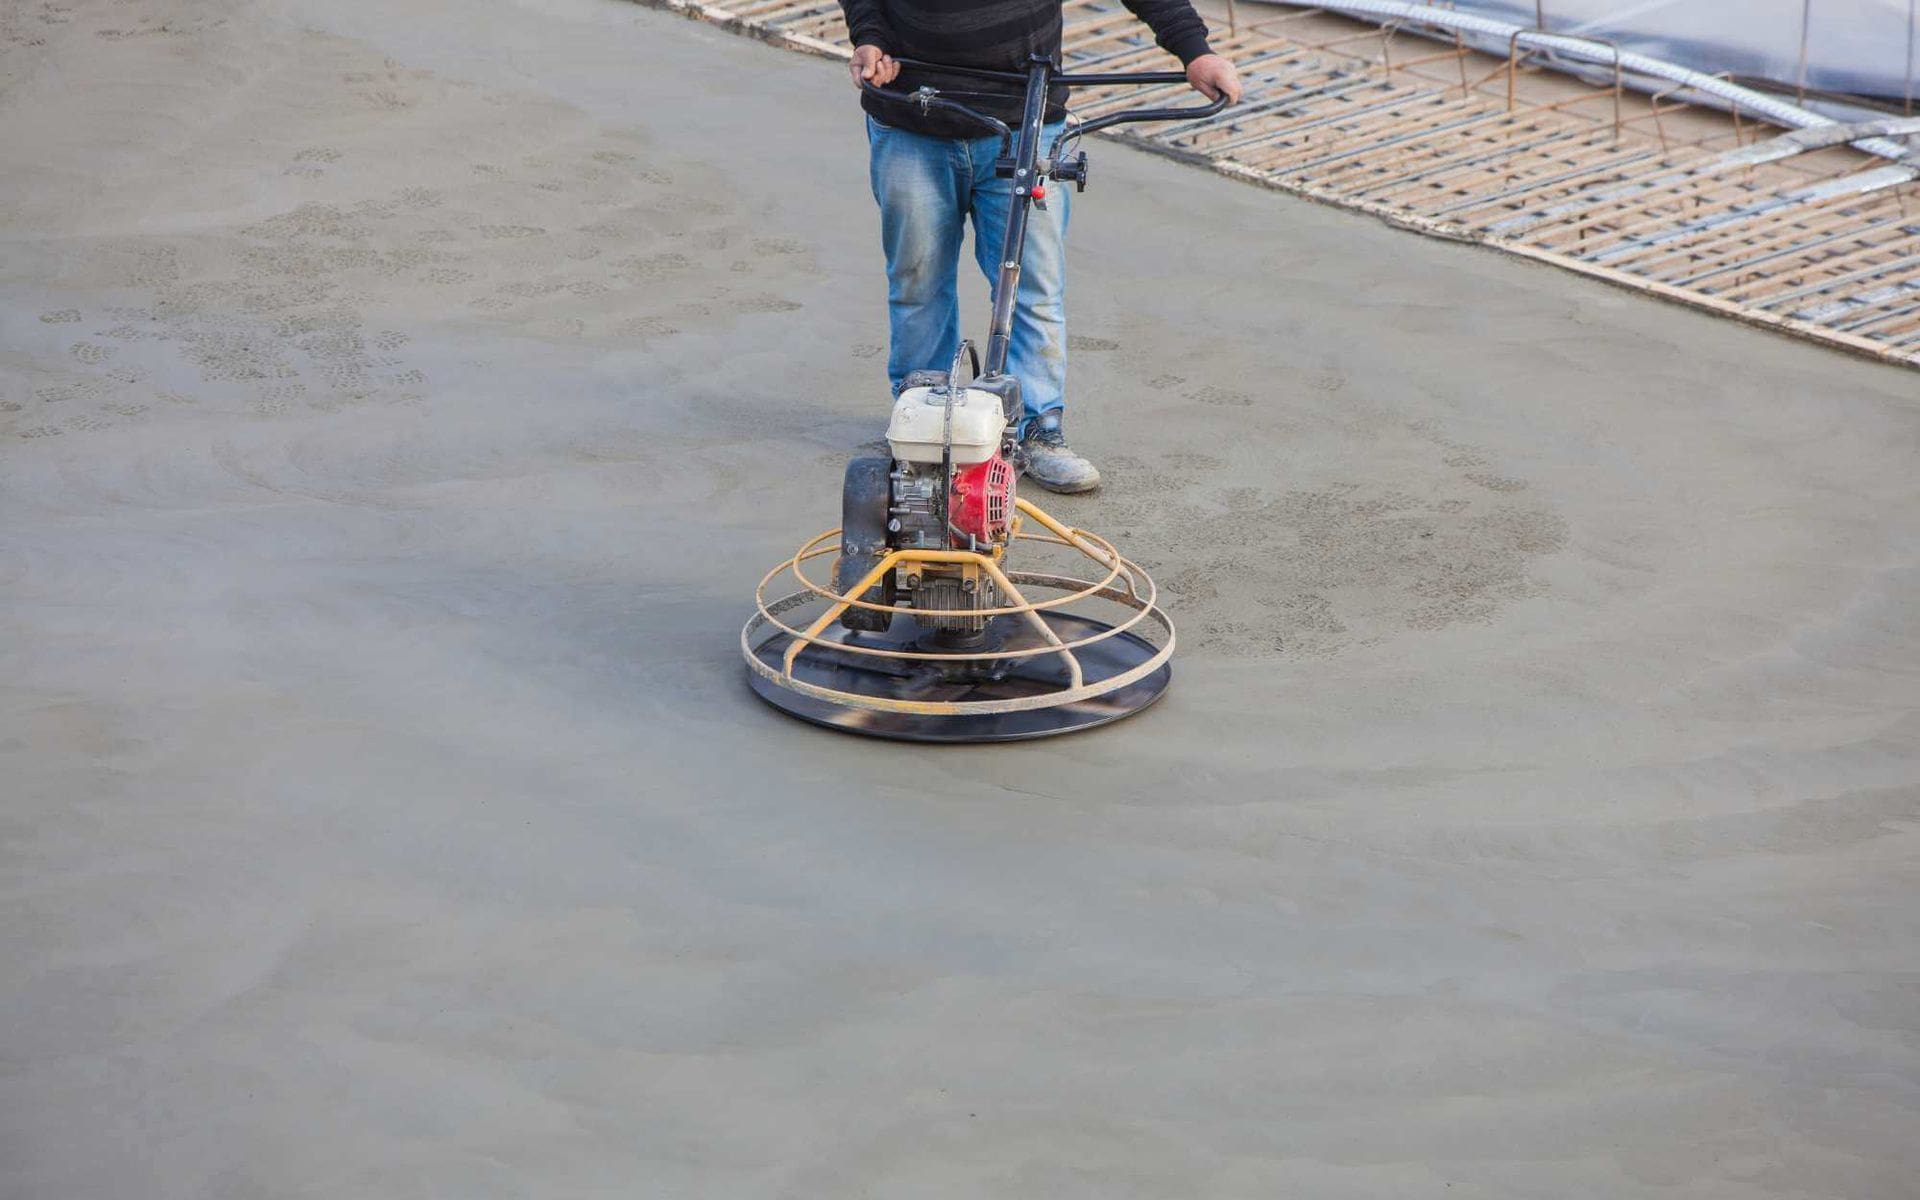 A construction worker in Buckeye AZ smoothens a concrete surface using a power trowel. Wearing jeans and holding the machine's handles firmly, he guides it over the freshly laid decorative concrete. Construction material is visible in the background, showcasing the expertise of local concrete contractors.